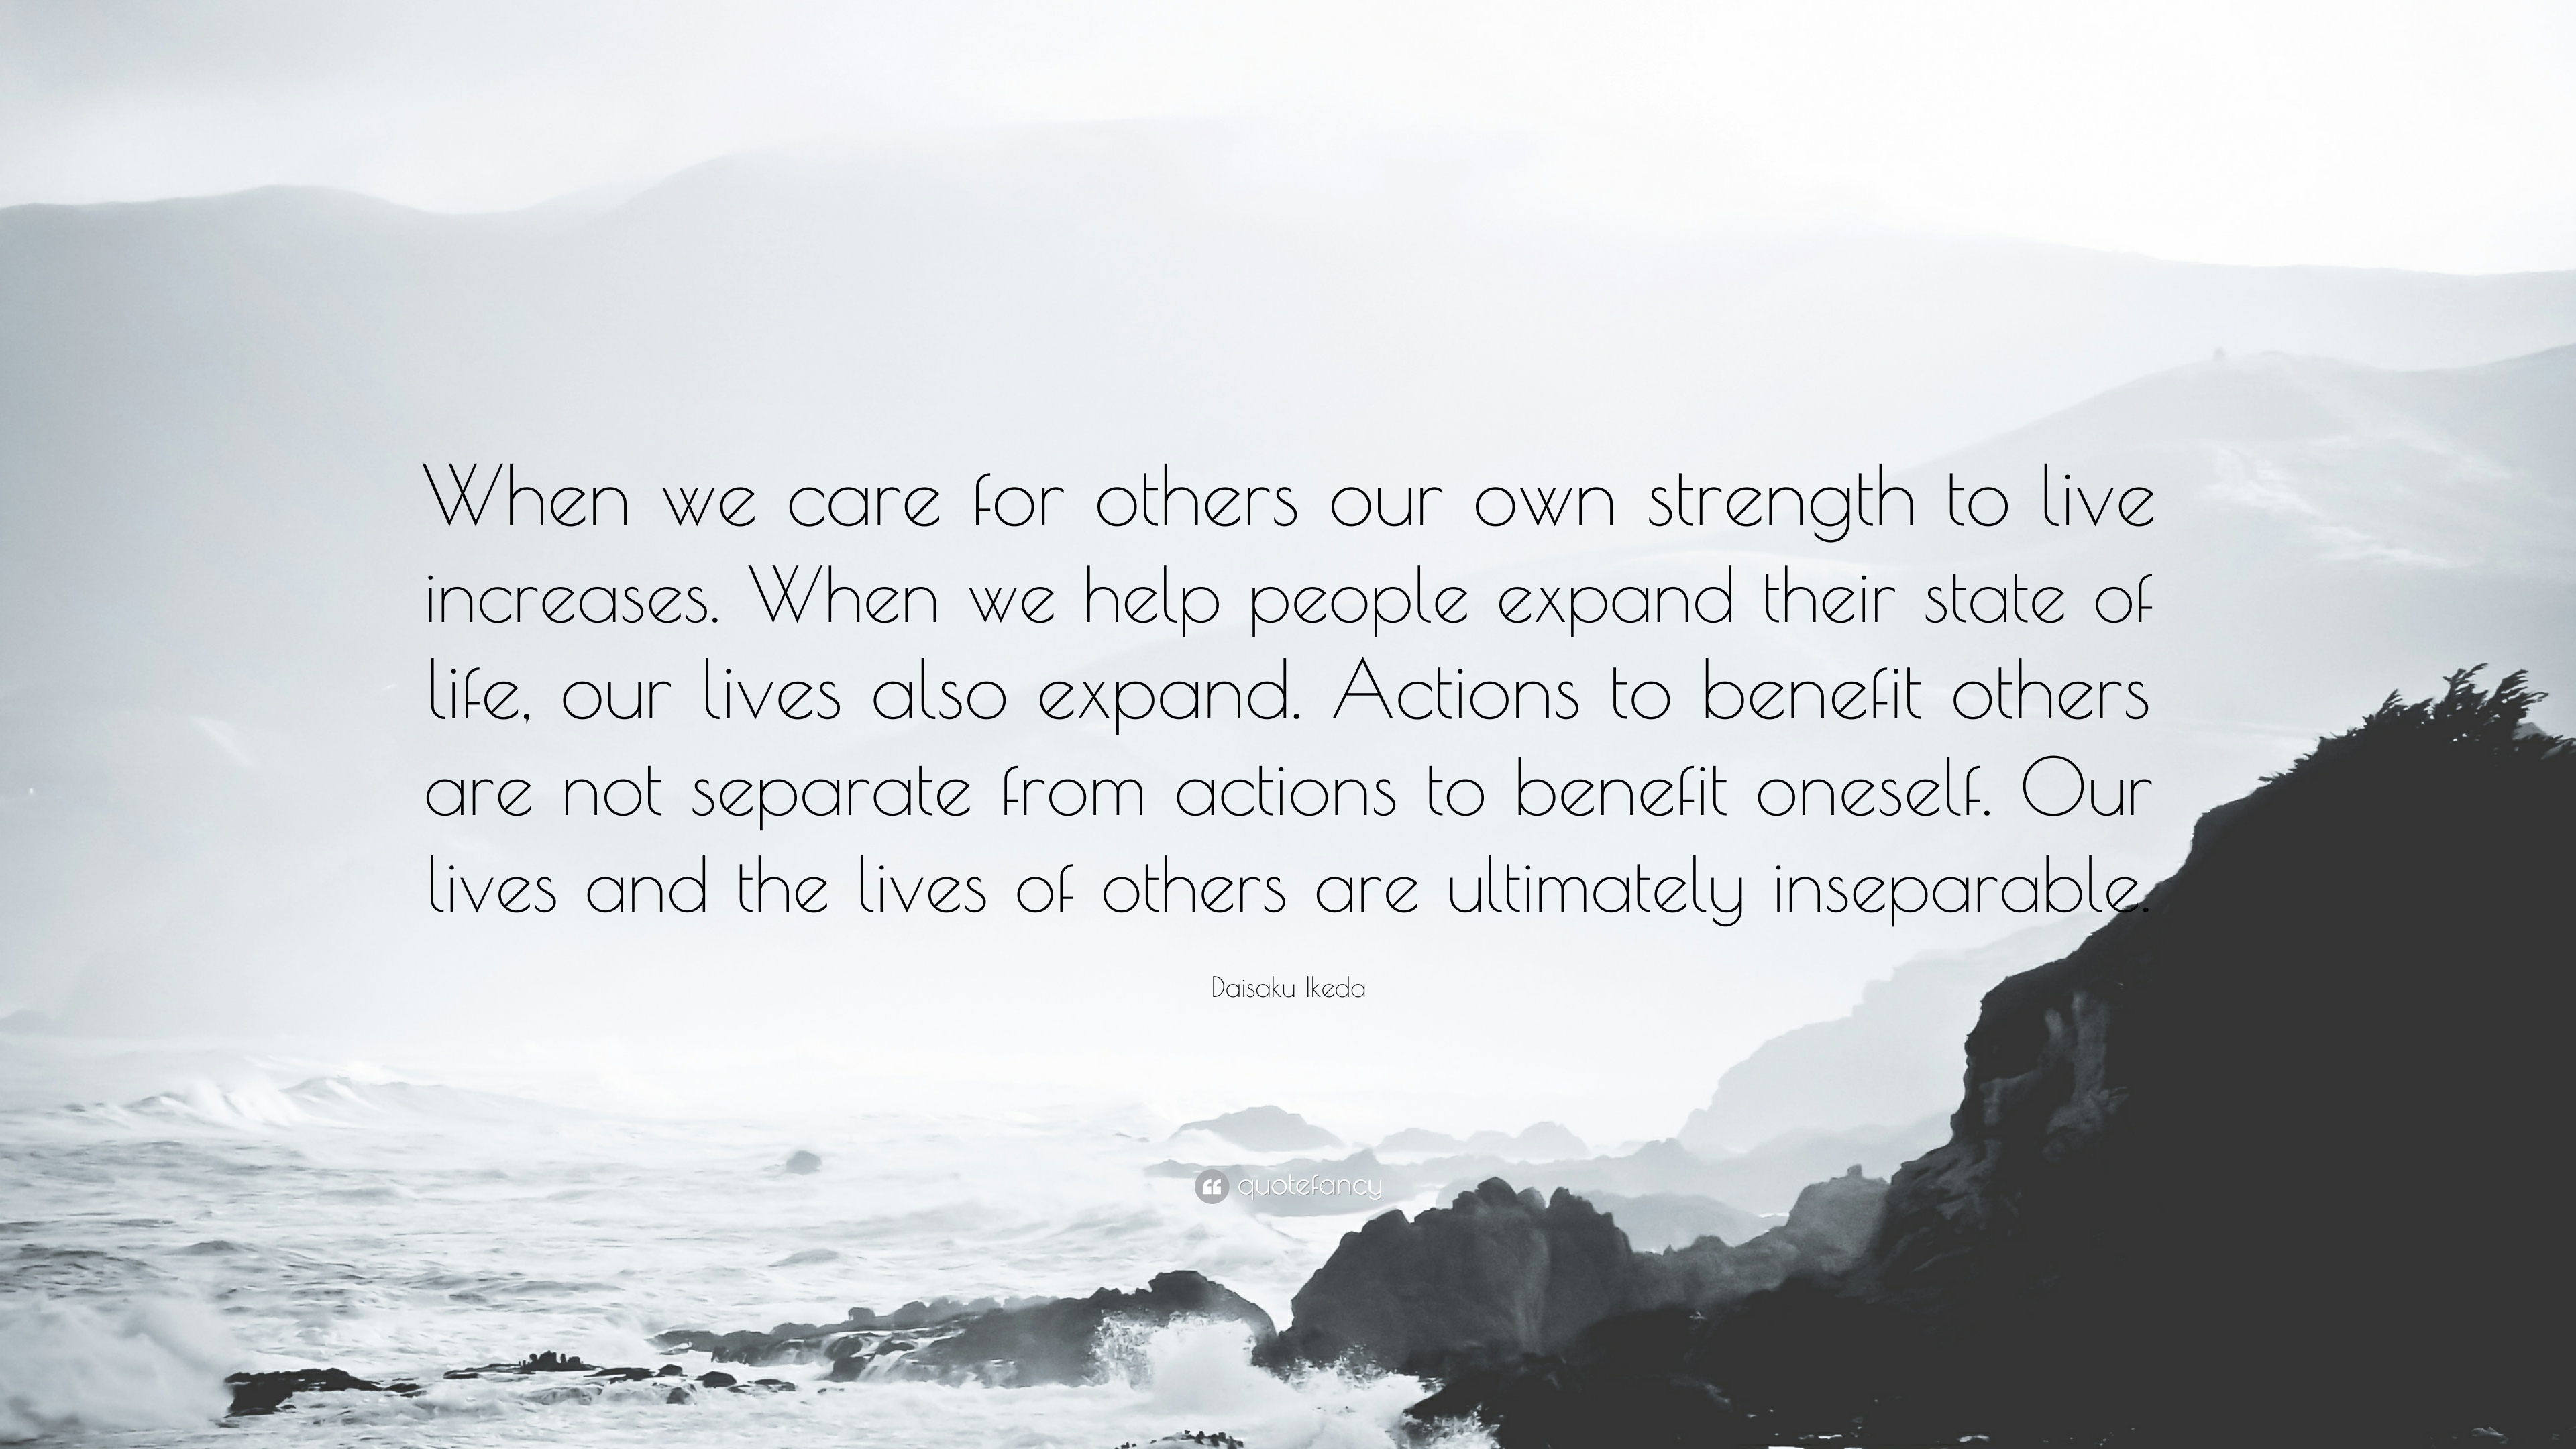 Daisaku Ikeda Quote: “When we care for others our own strength to ...